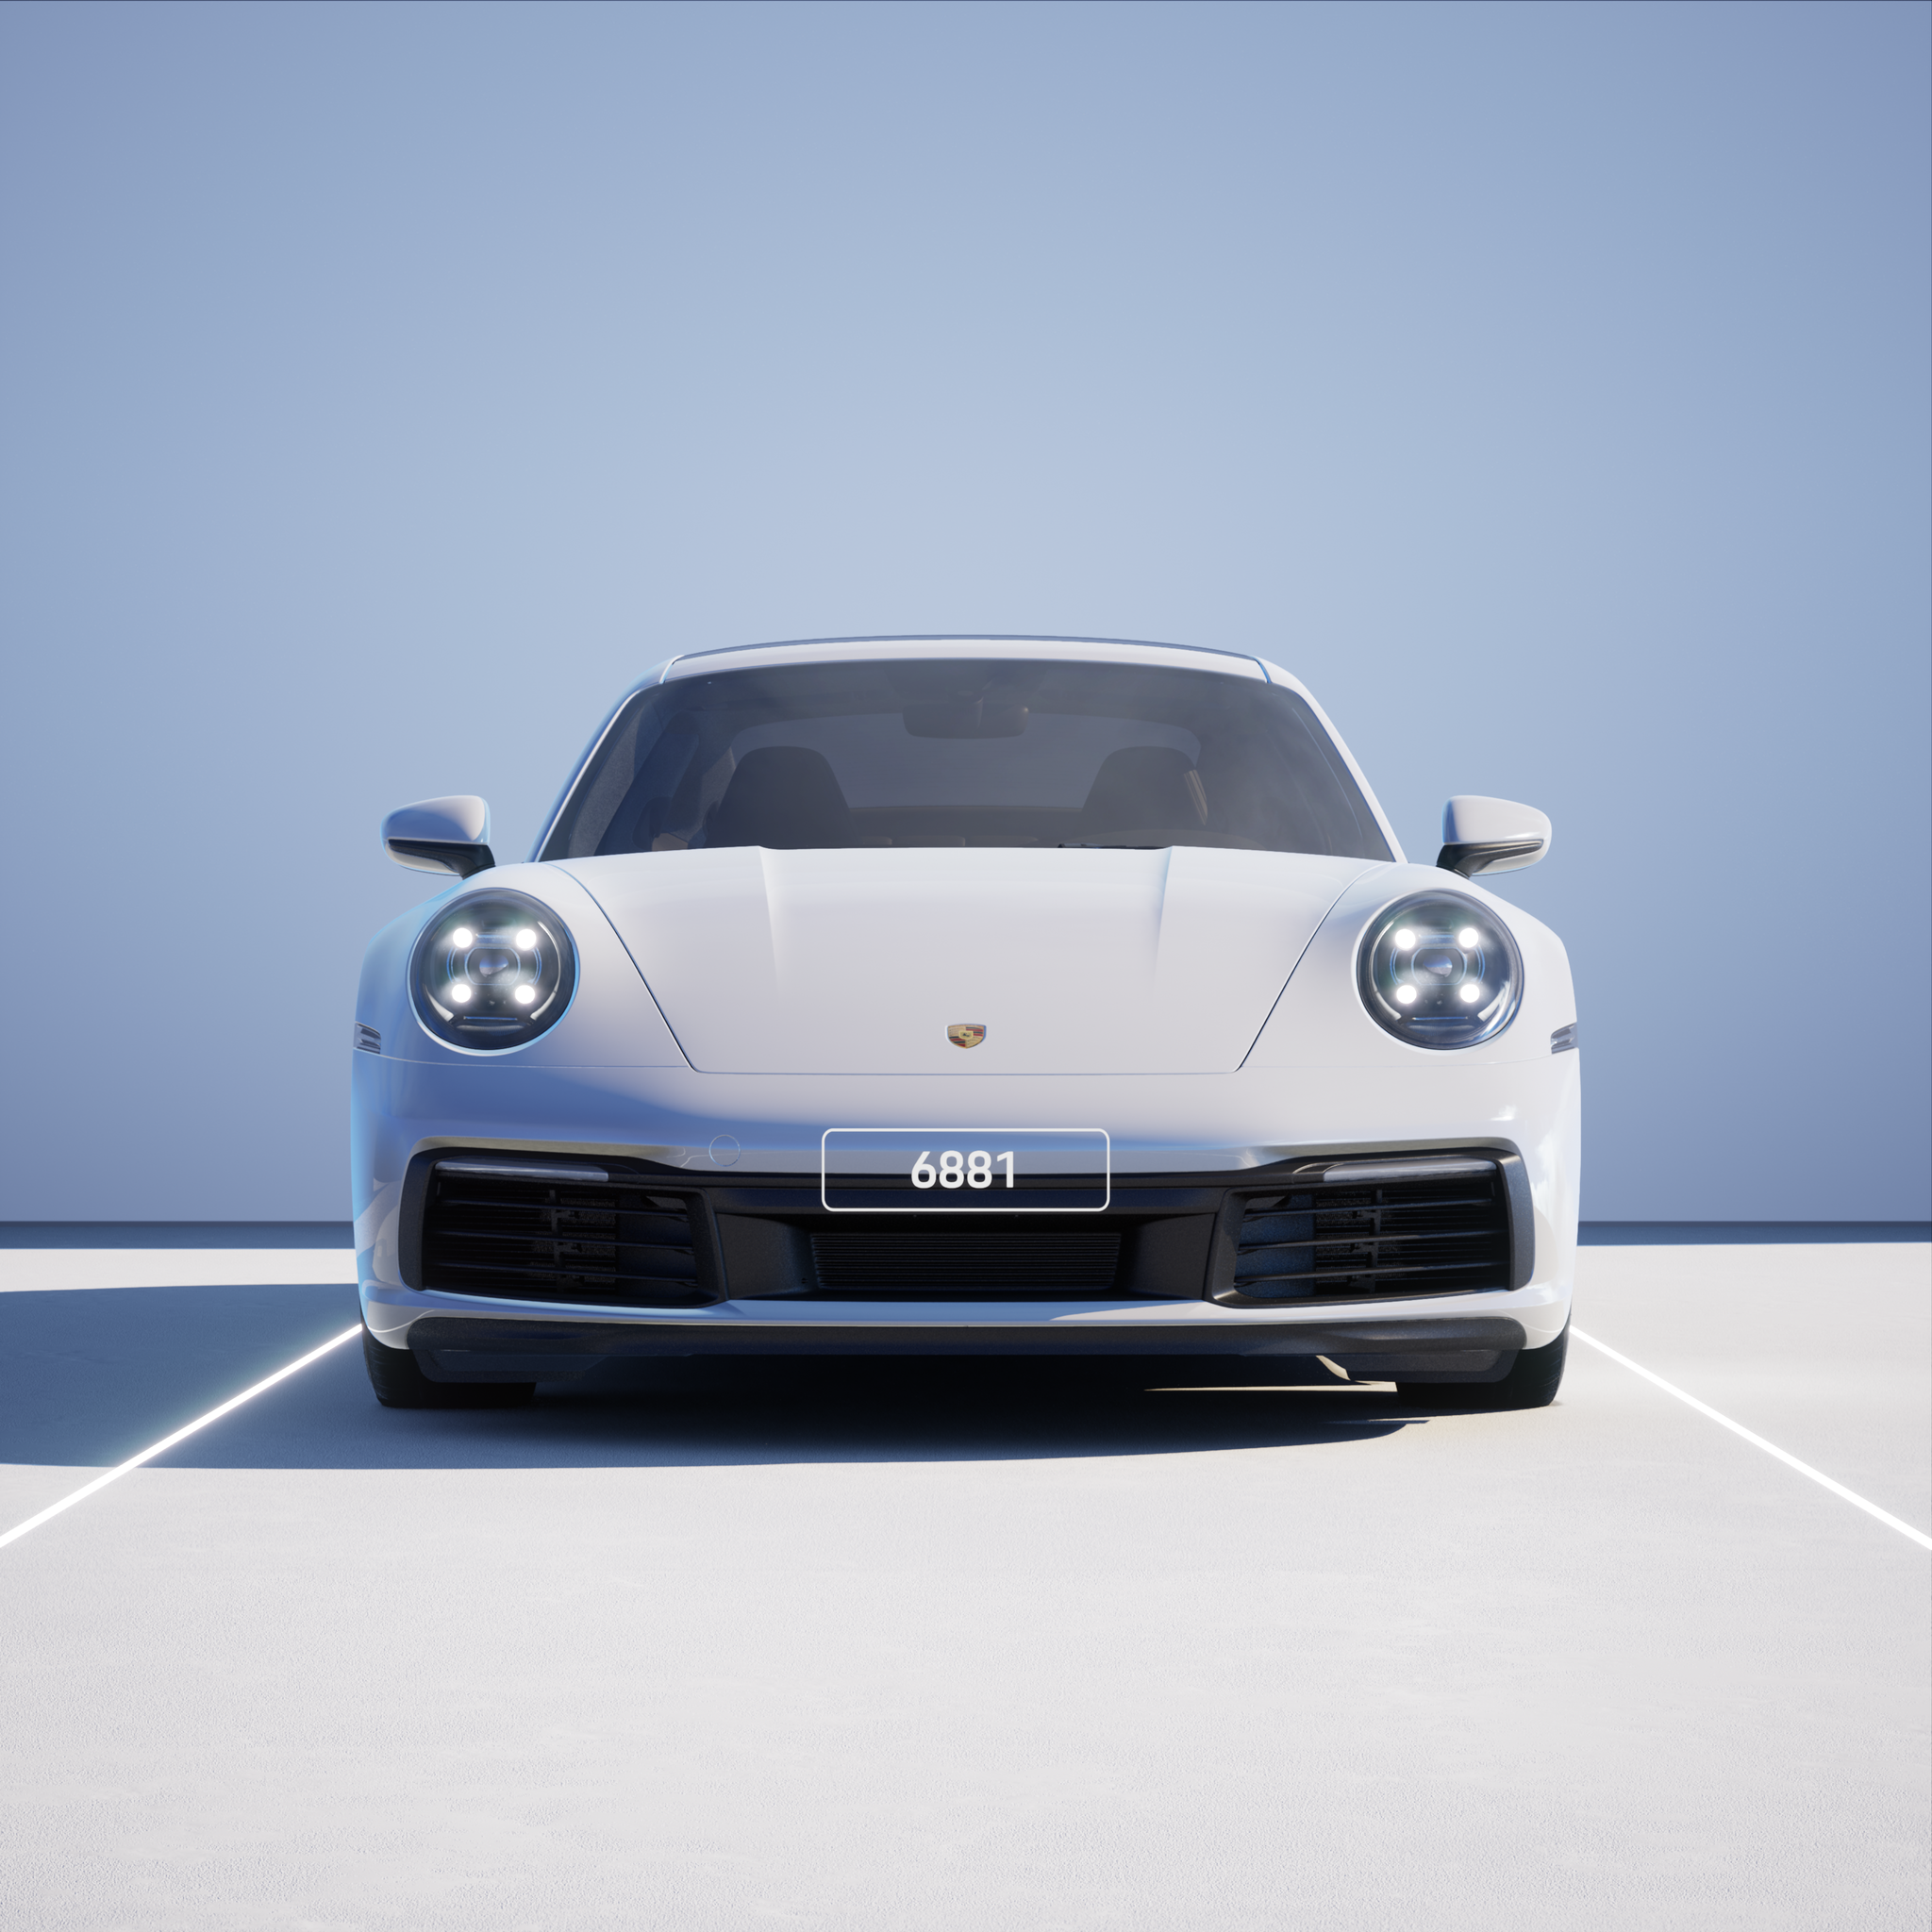 The PORSCHΞ 911 6881 image in phase